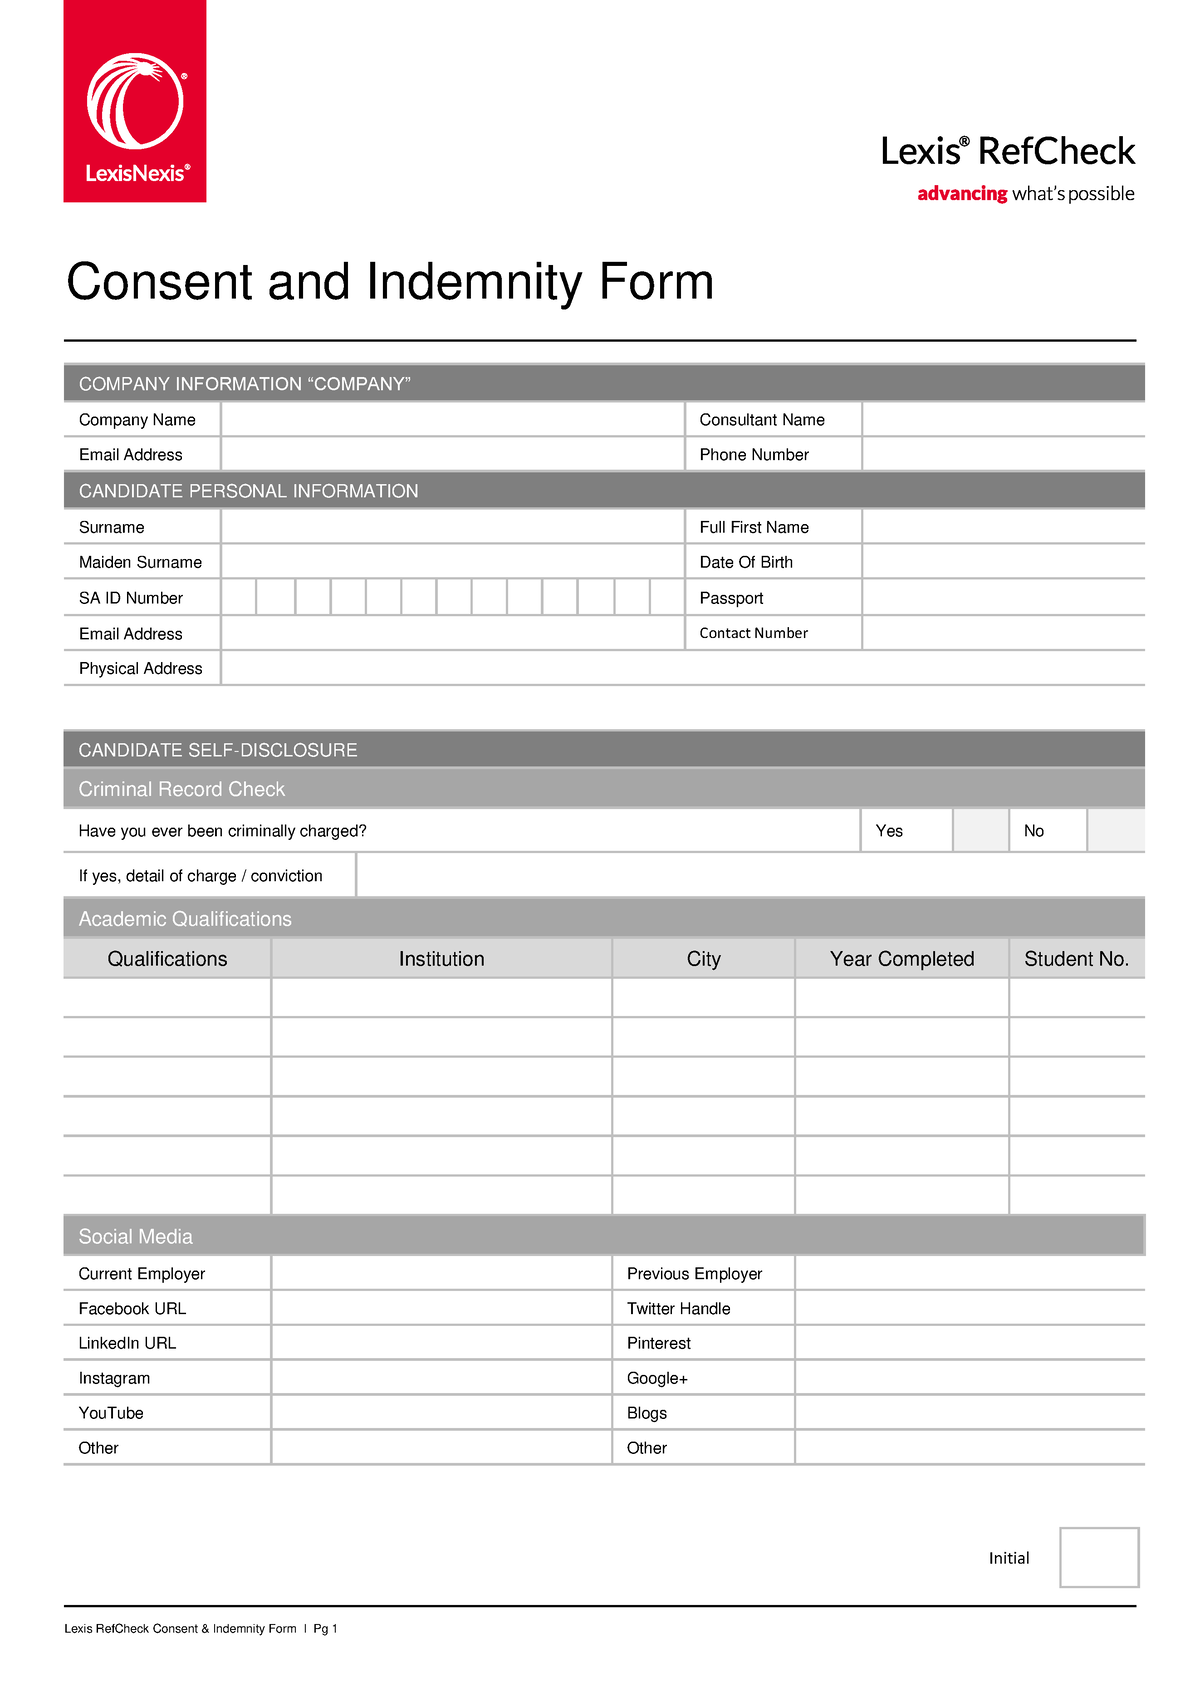 Consent And Indemnity Form Consent And Indemnity Form Company Information “company” Company 3292